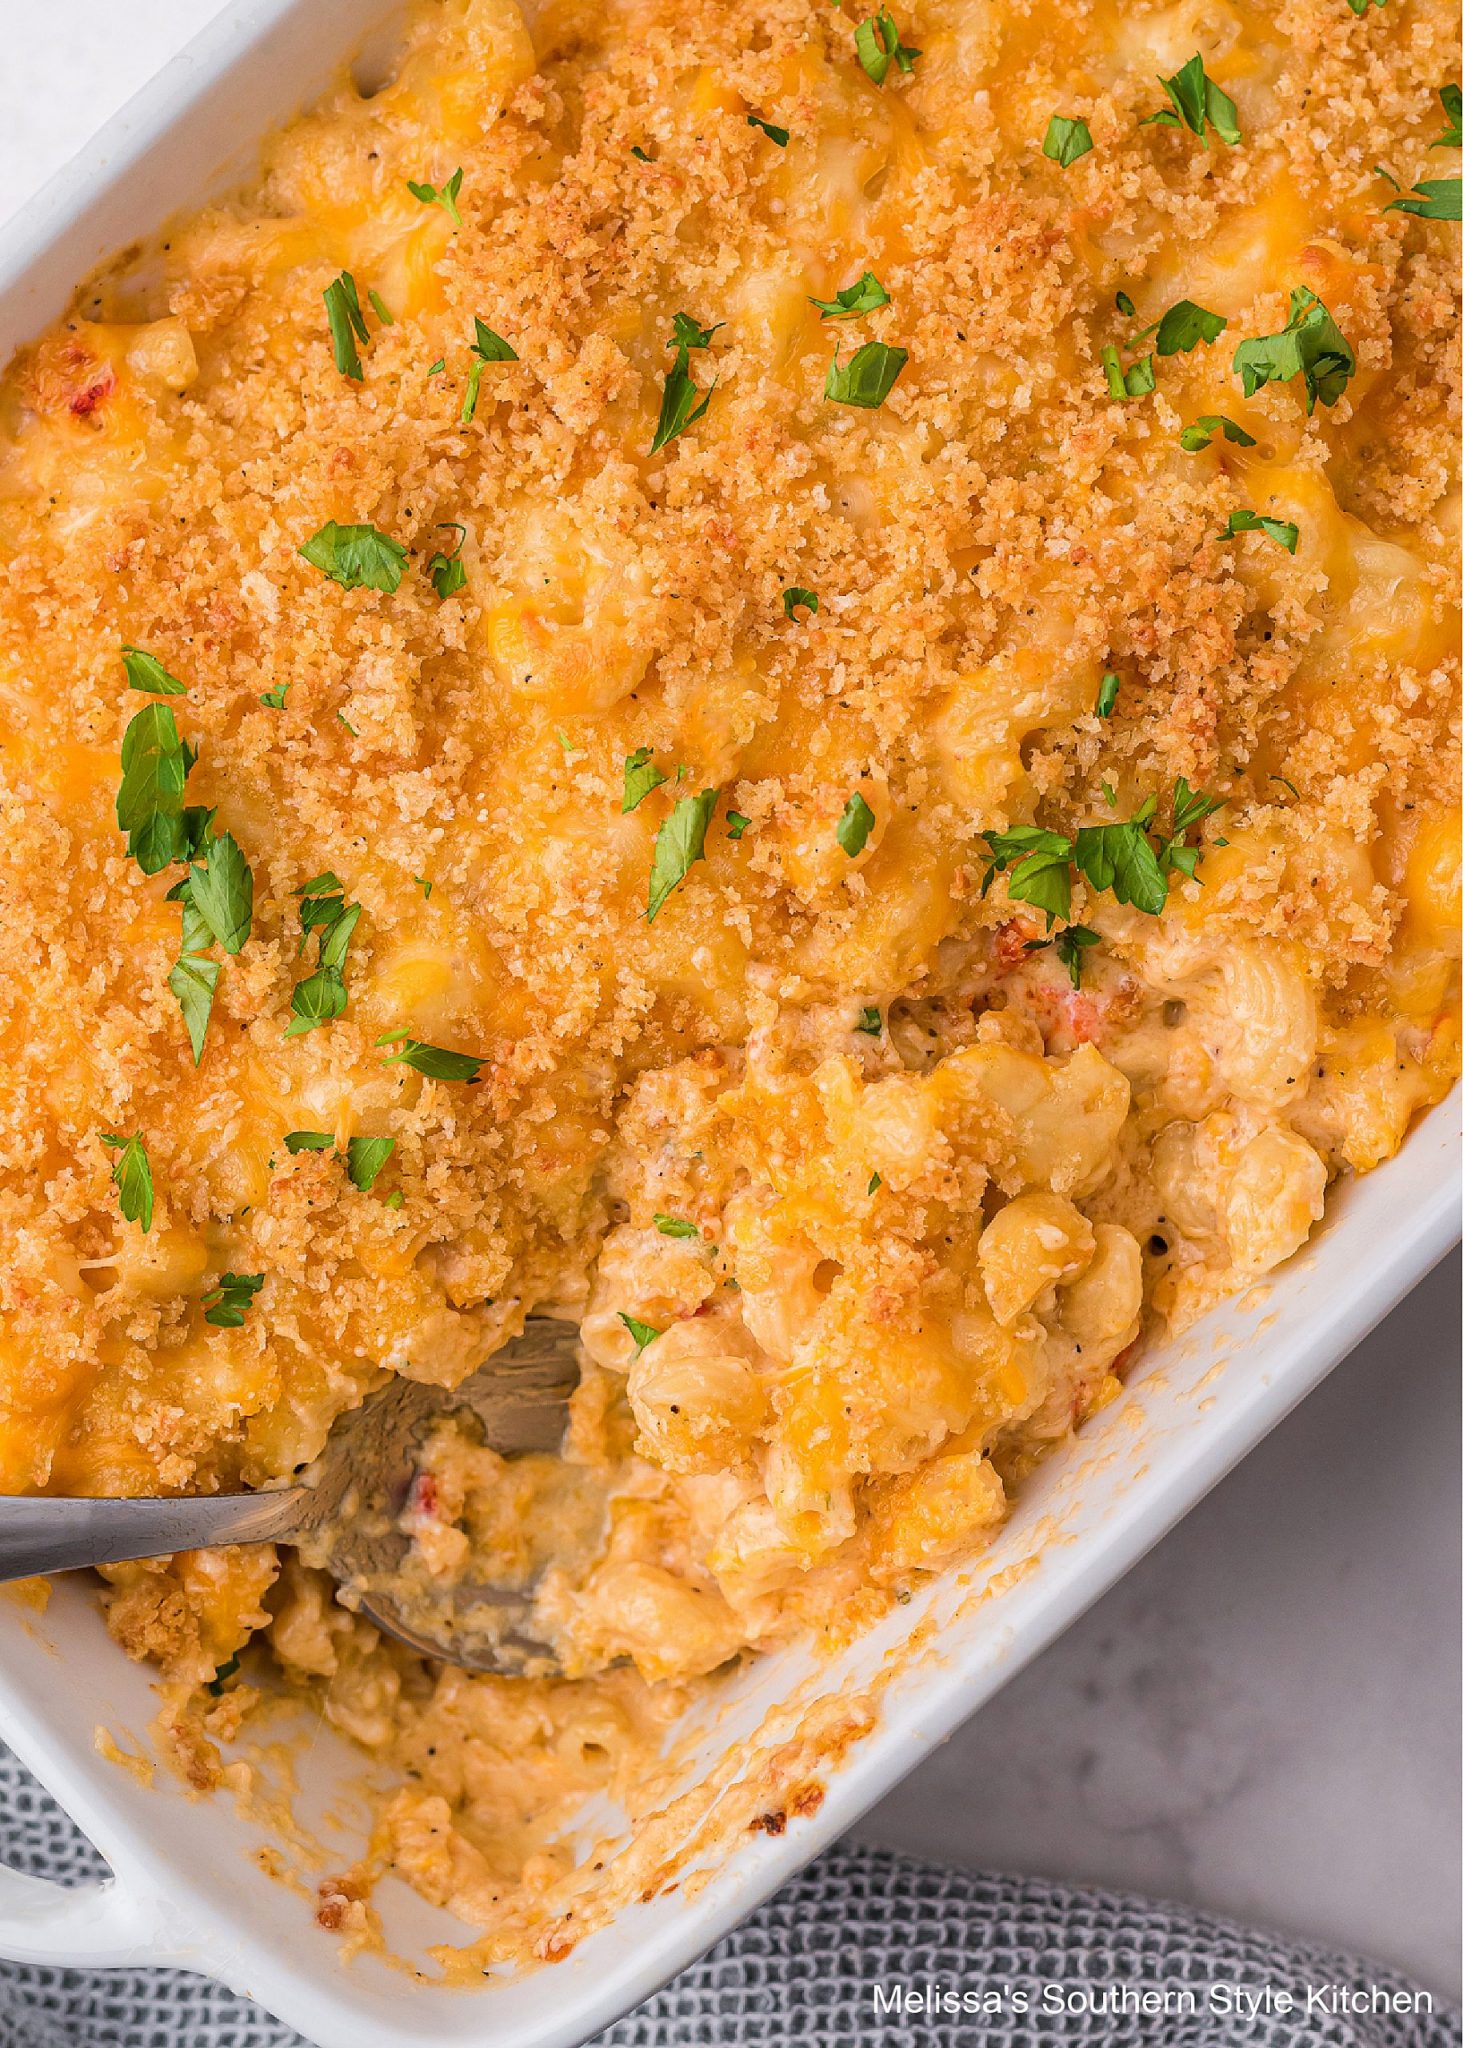 Lobster Macaroni and Cheese baked